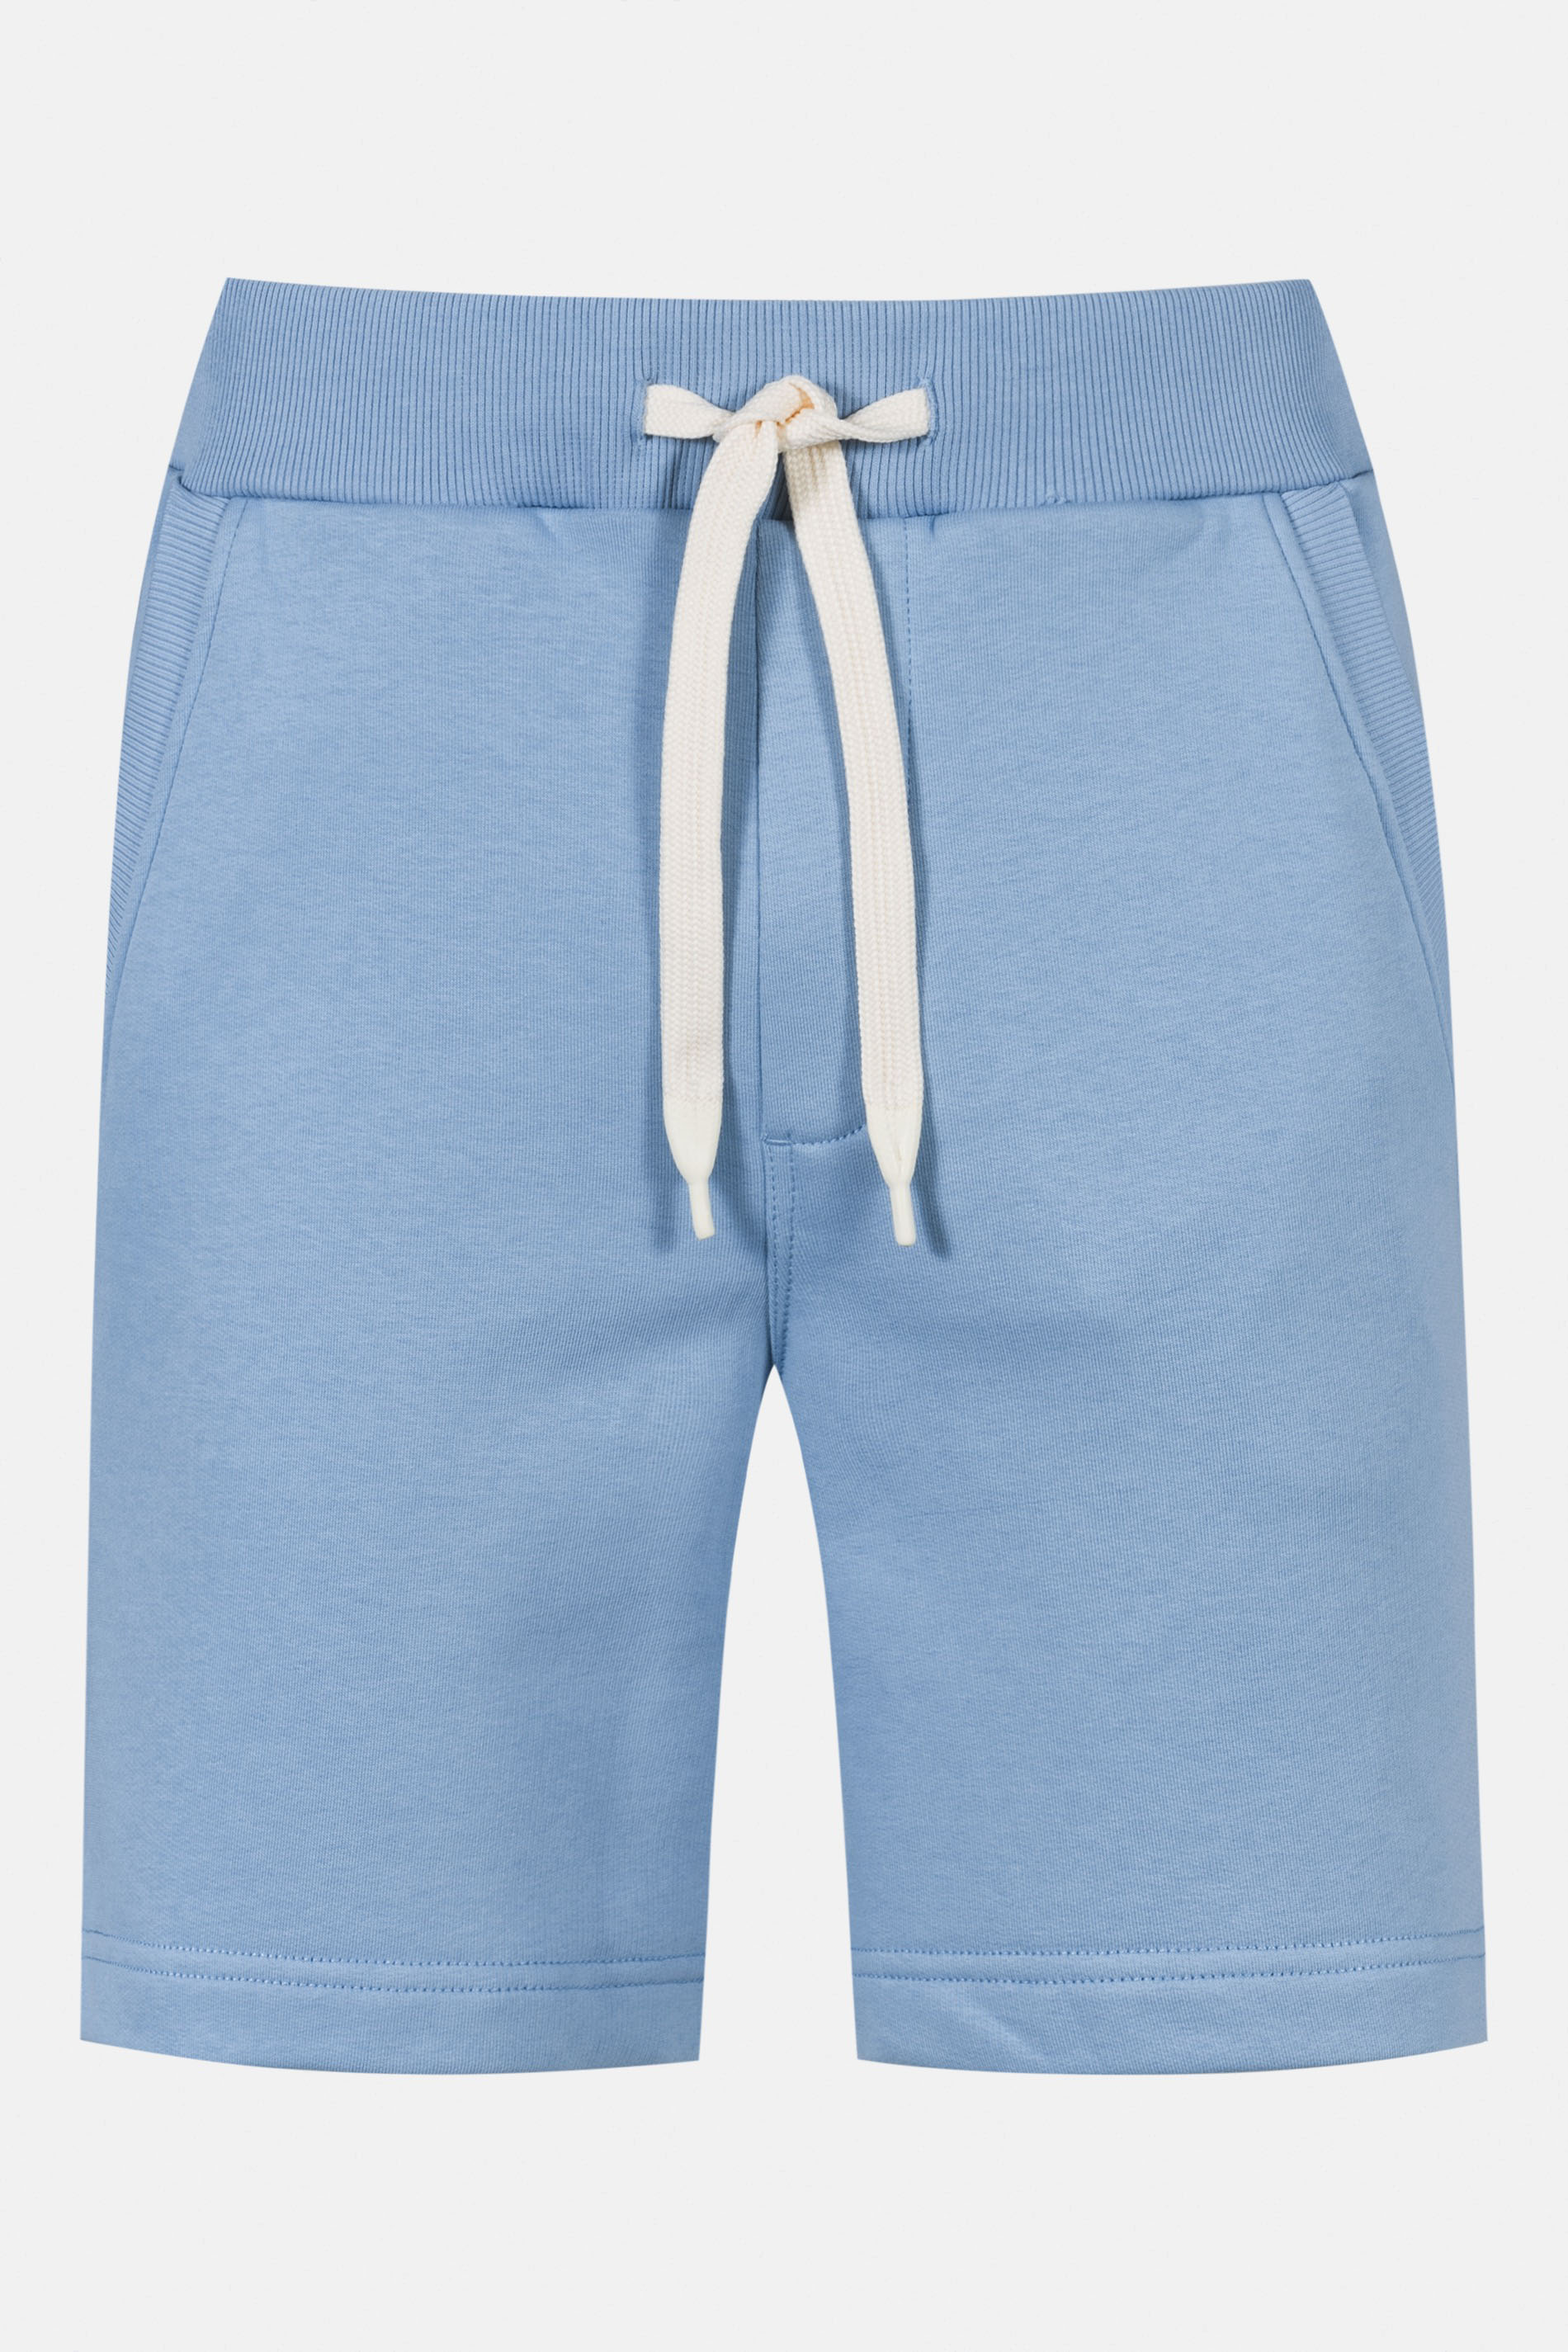 Track shorts Serie Skywalk Uitknippen | mey®